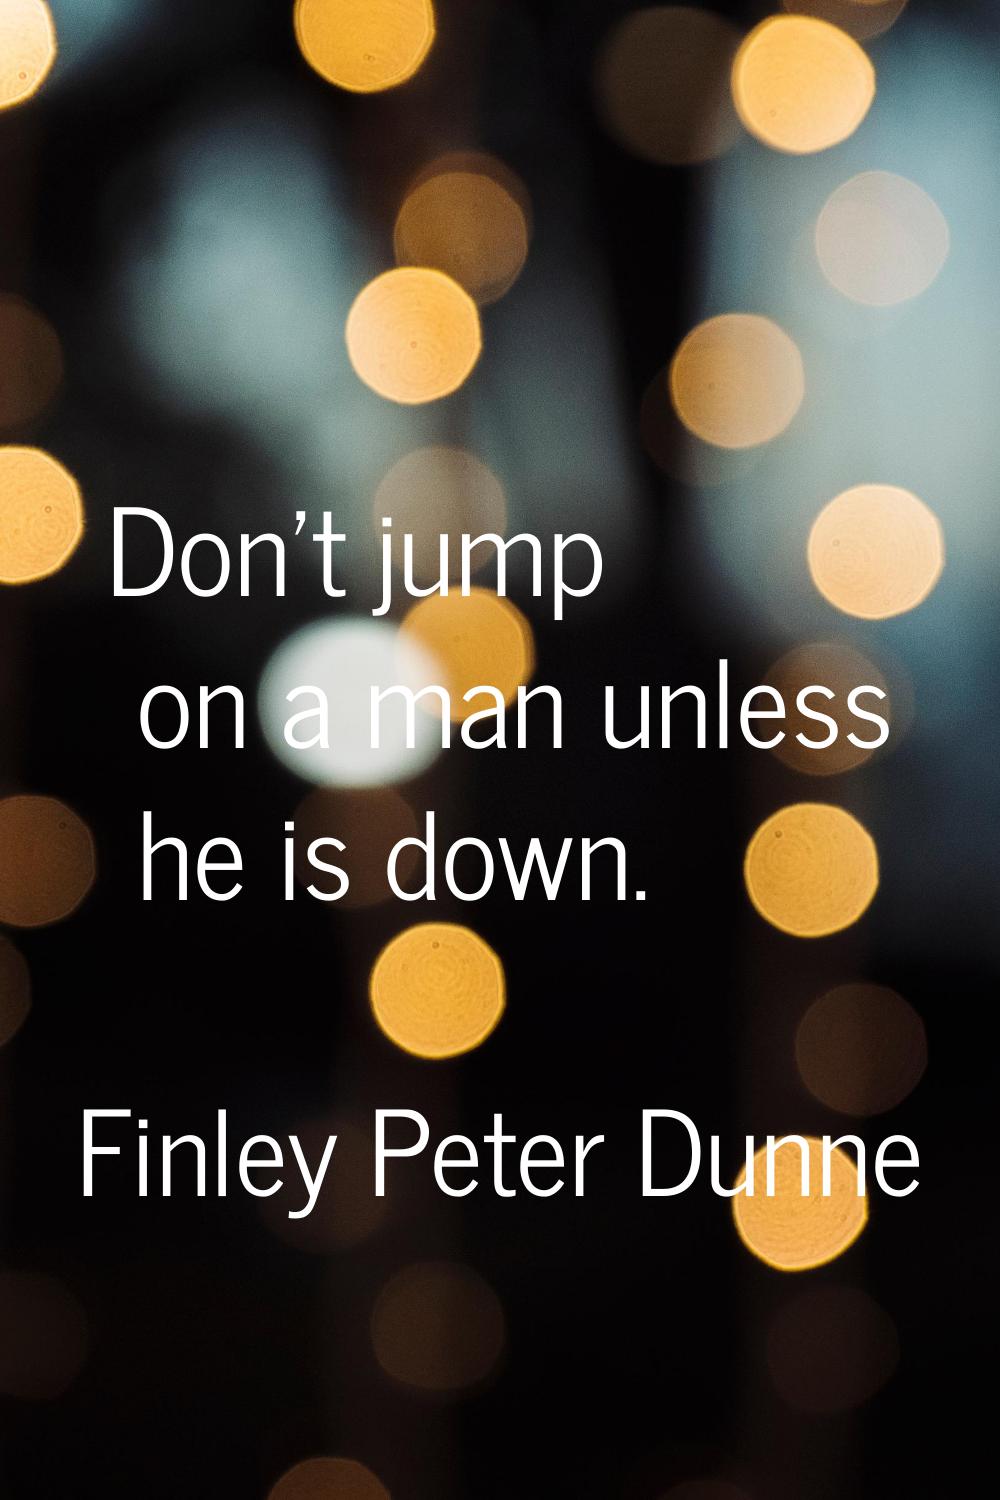 Don't jump on a man unless he is down.